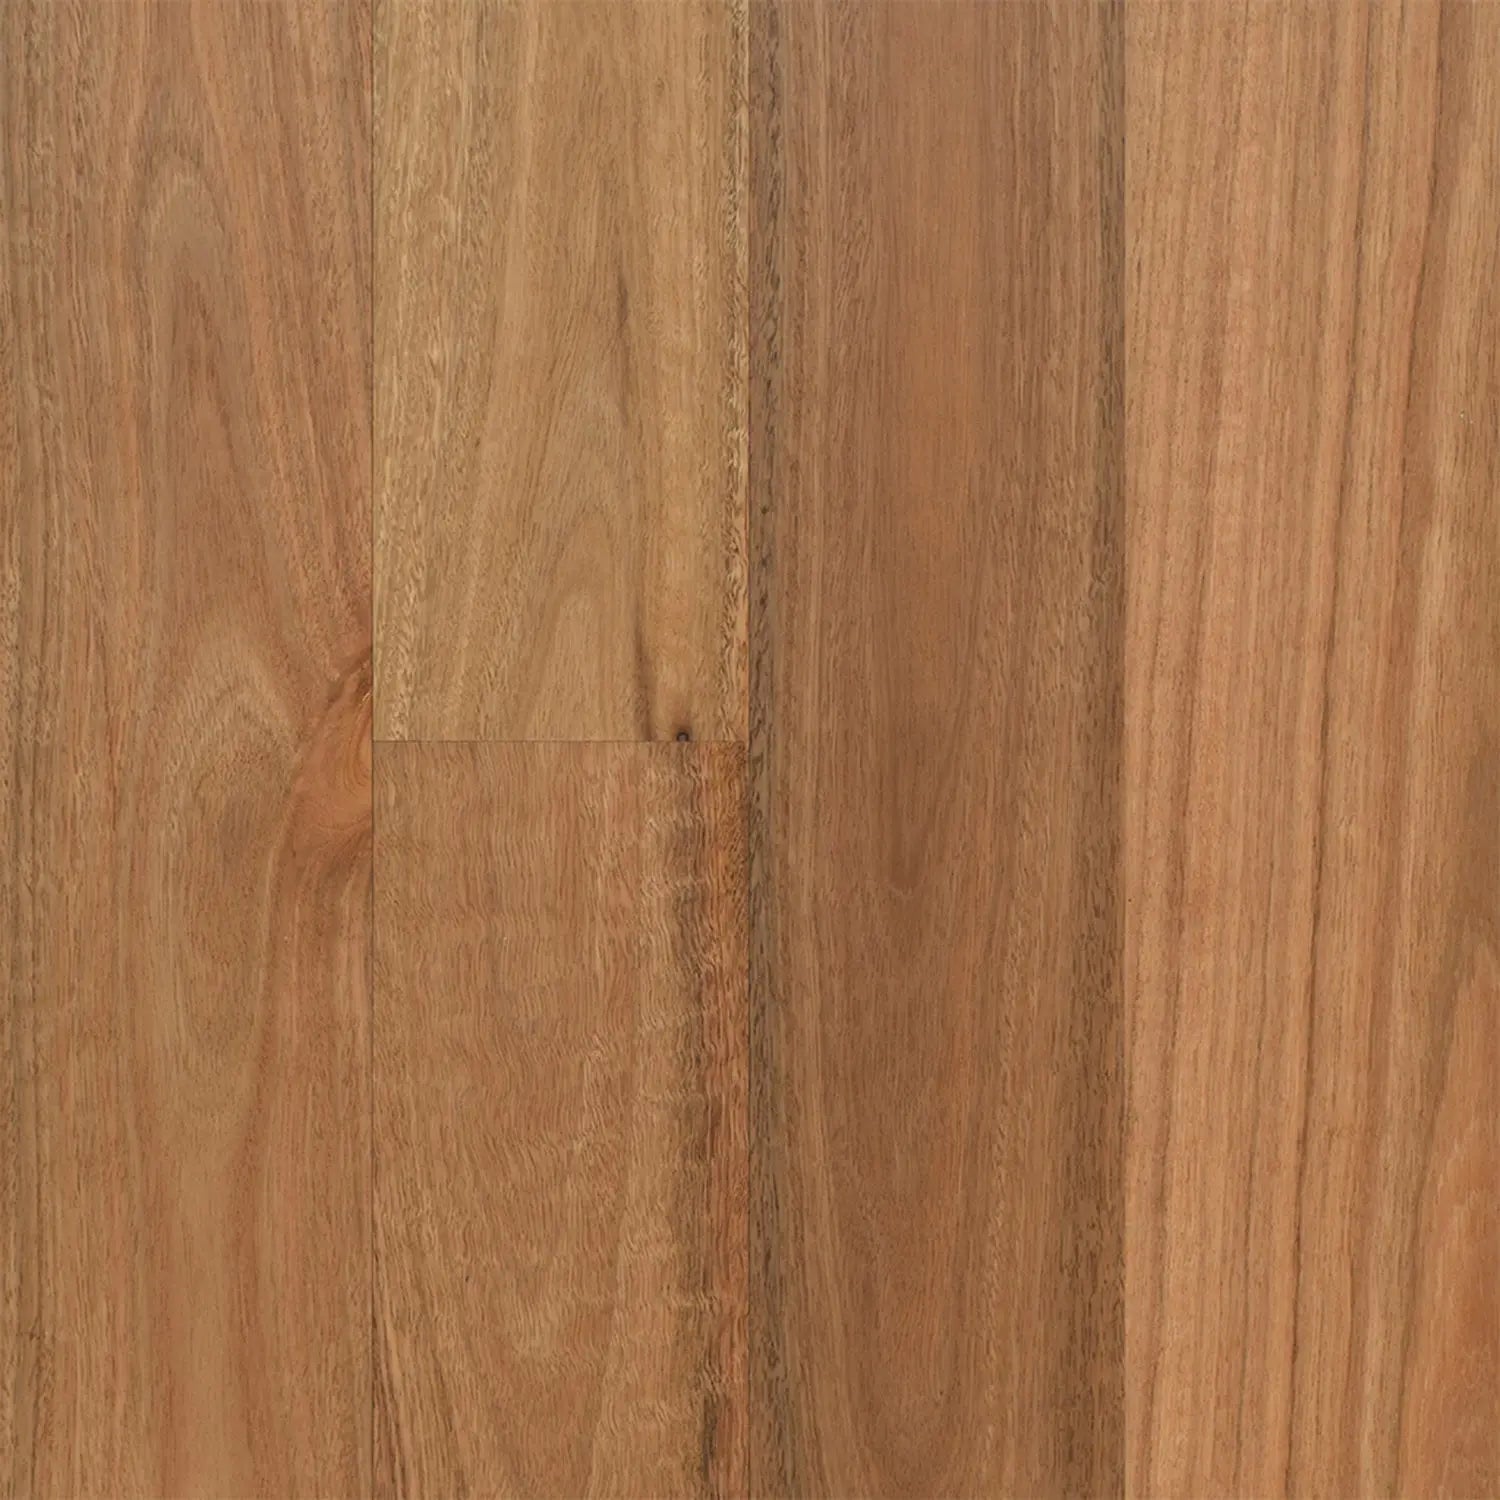 Spotted Gum Opulence Native Timber Flooring Australian Select Timbers